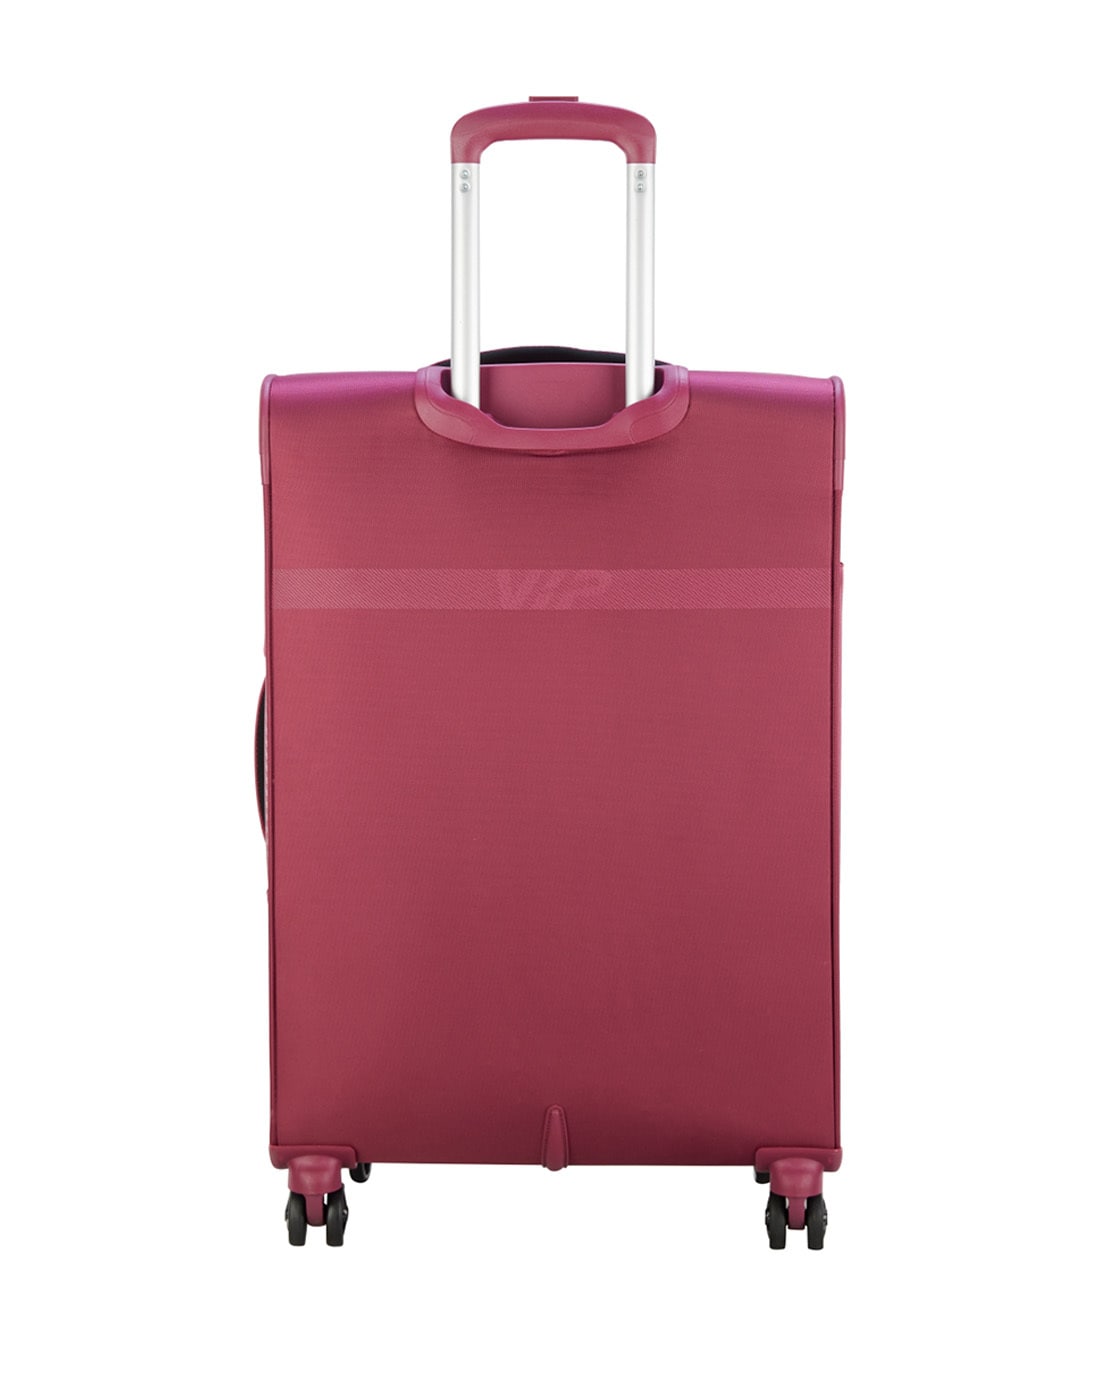 Luggage Trolley Online | Buyluggage Travel Bag at Best Offers